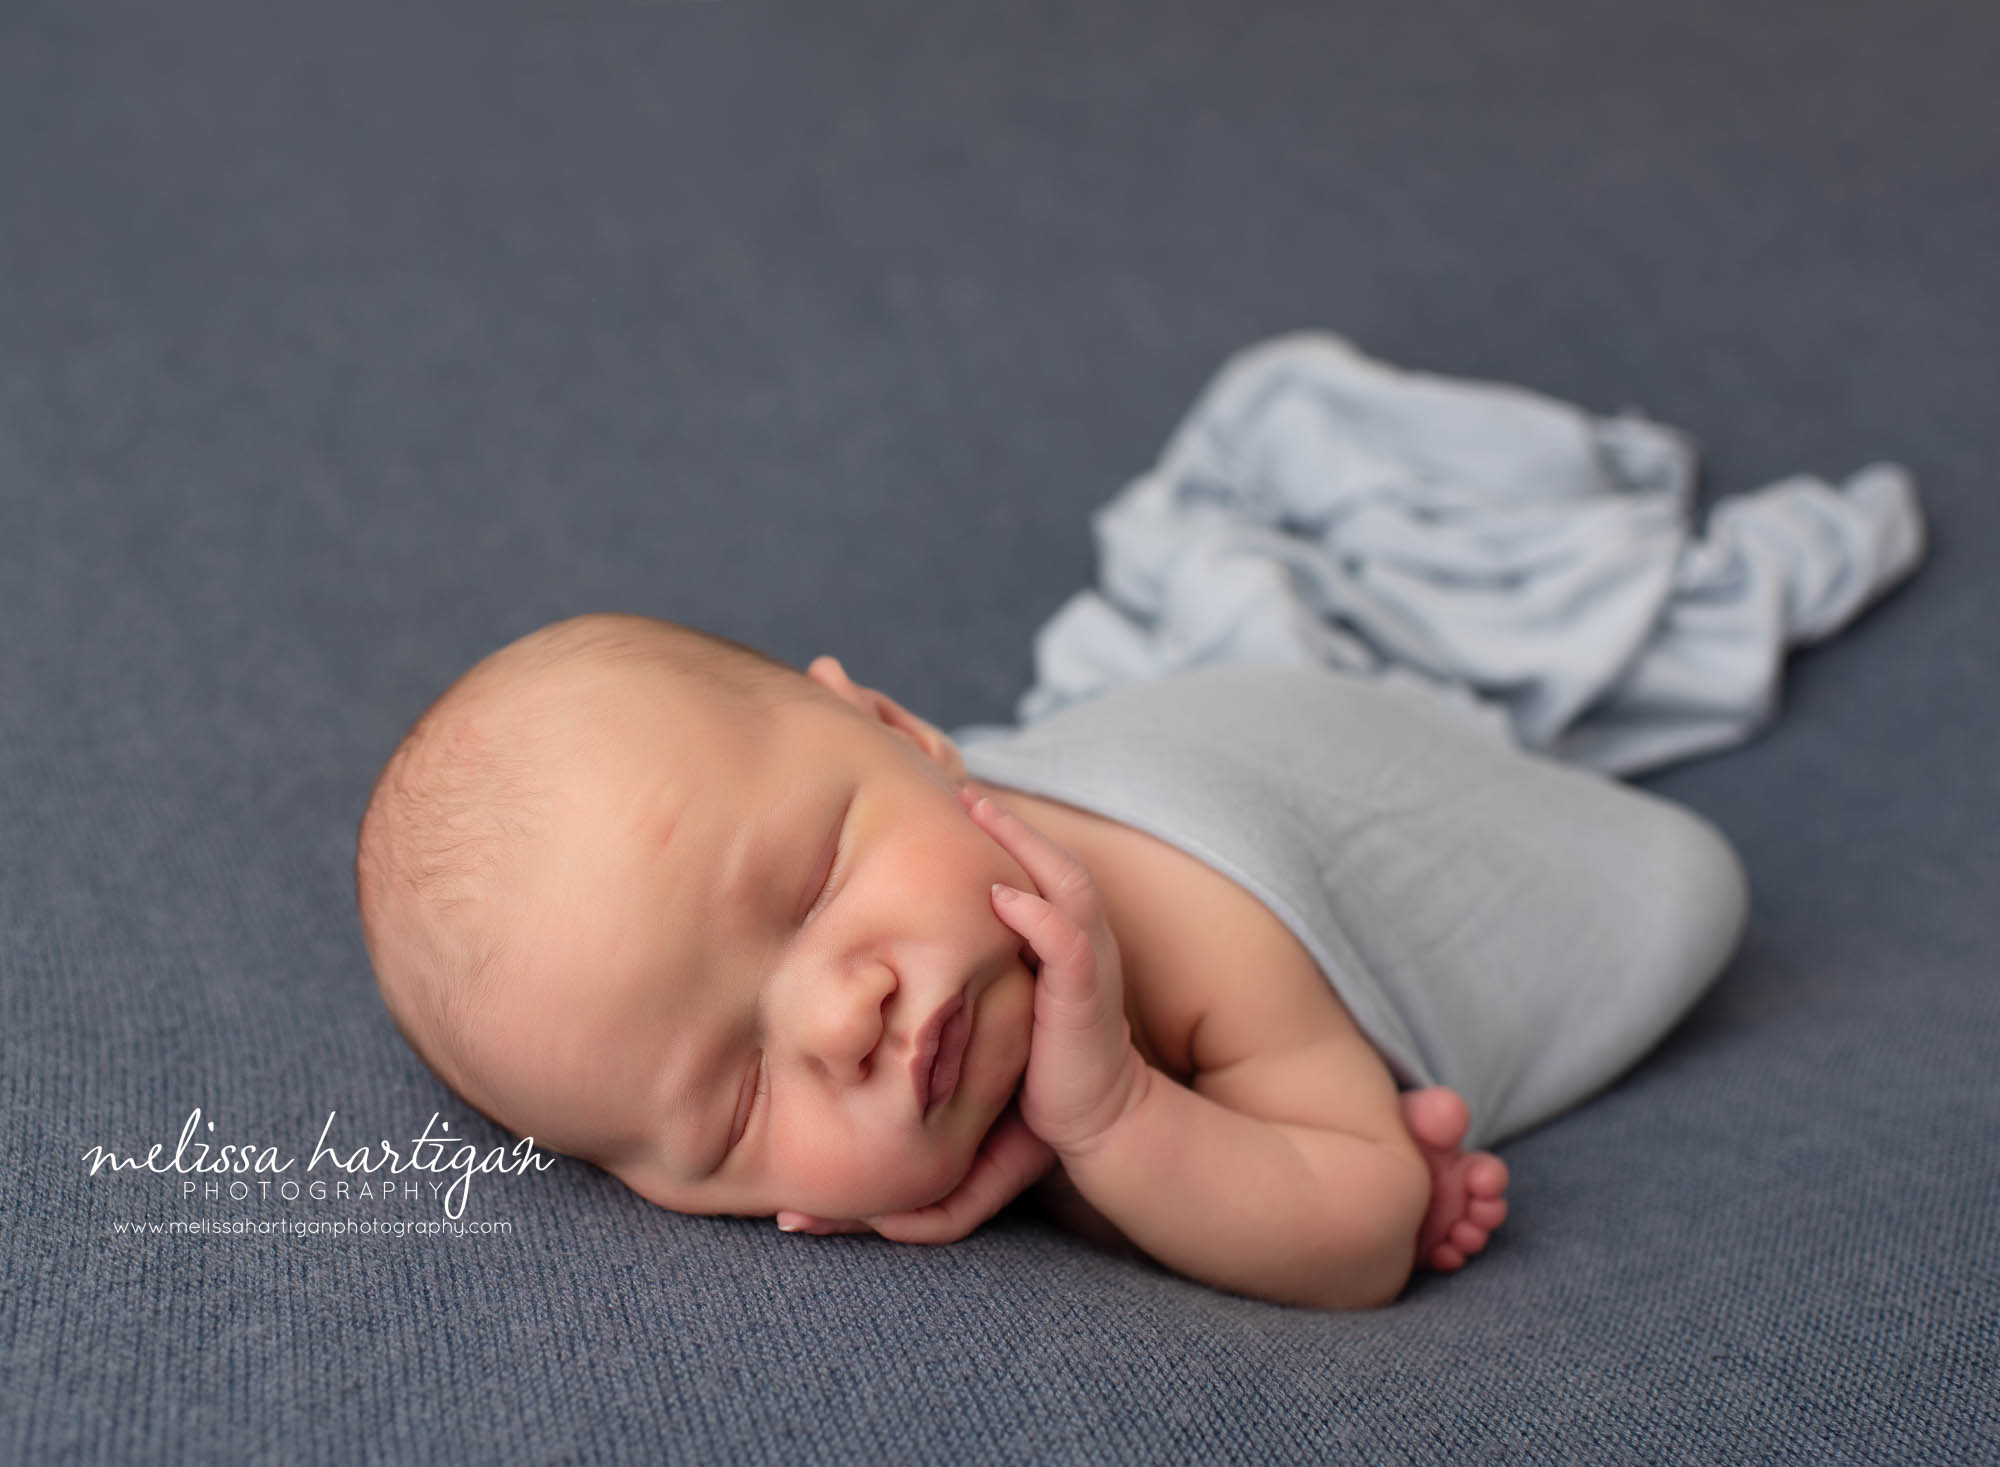 baby boy posed on side timber pose newborn photography studio photographer tolland connecticut newborn photography